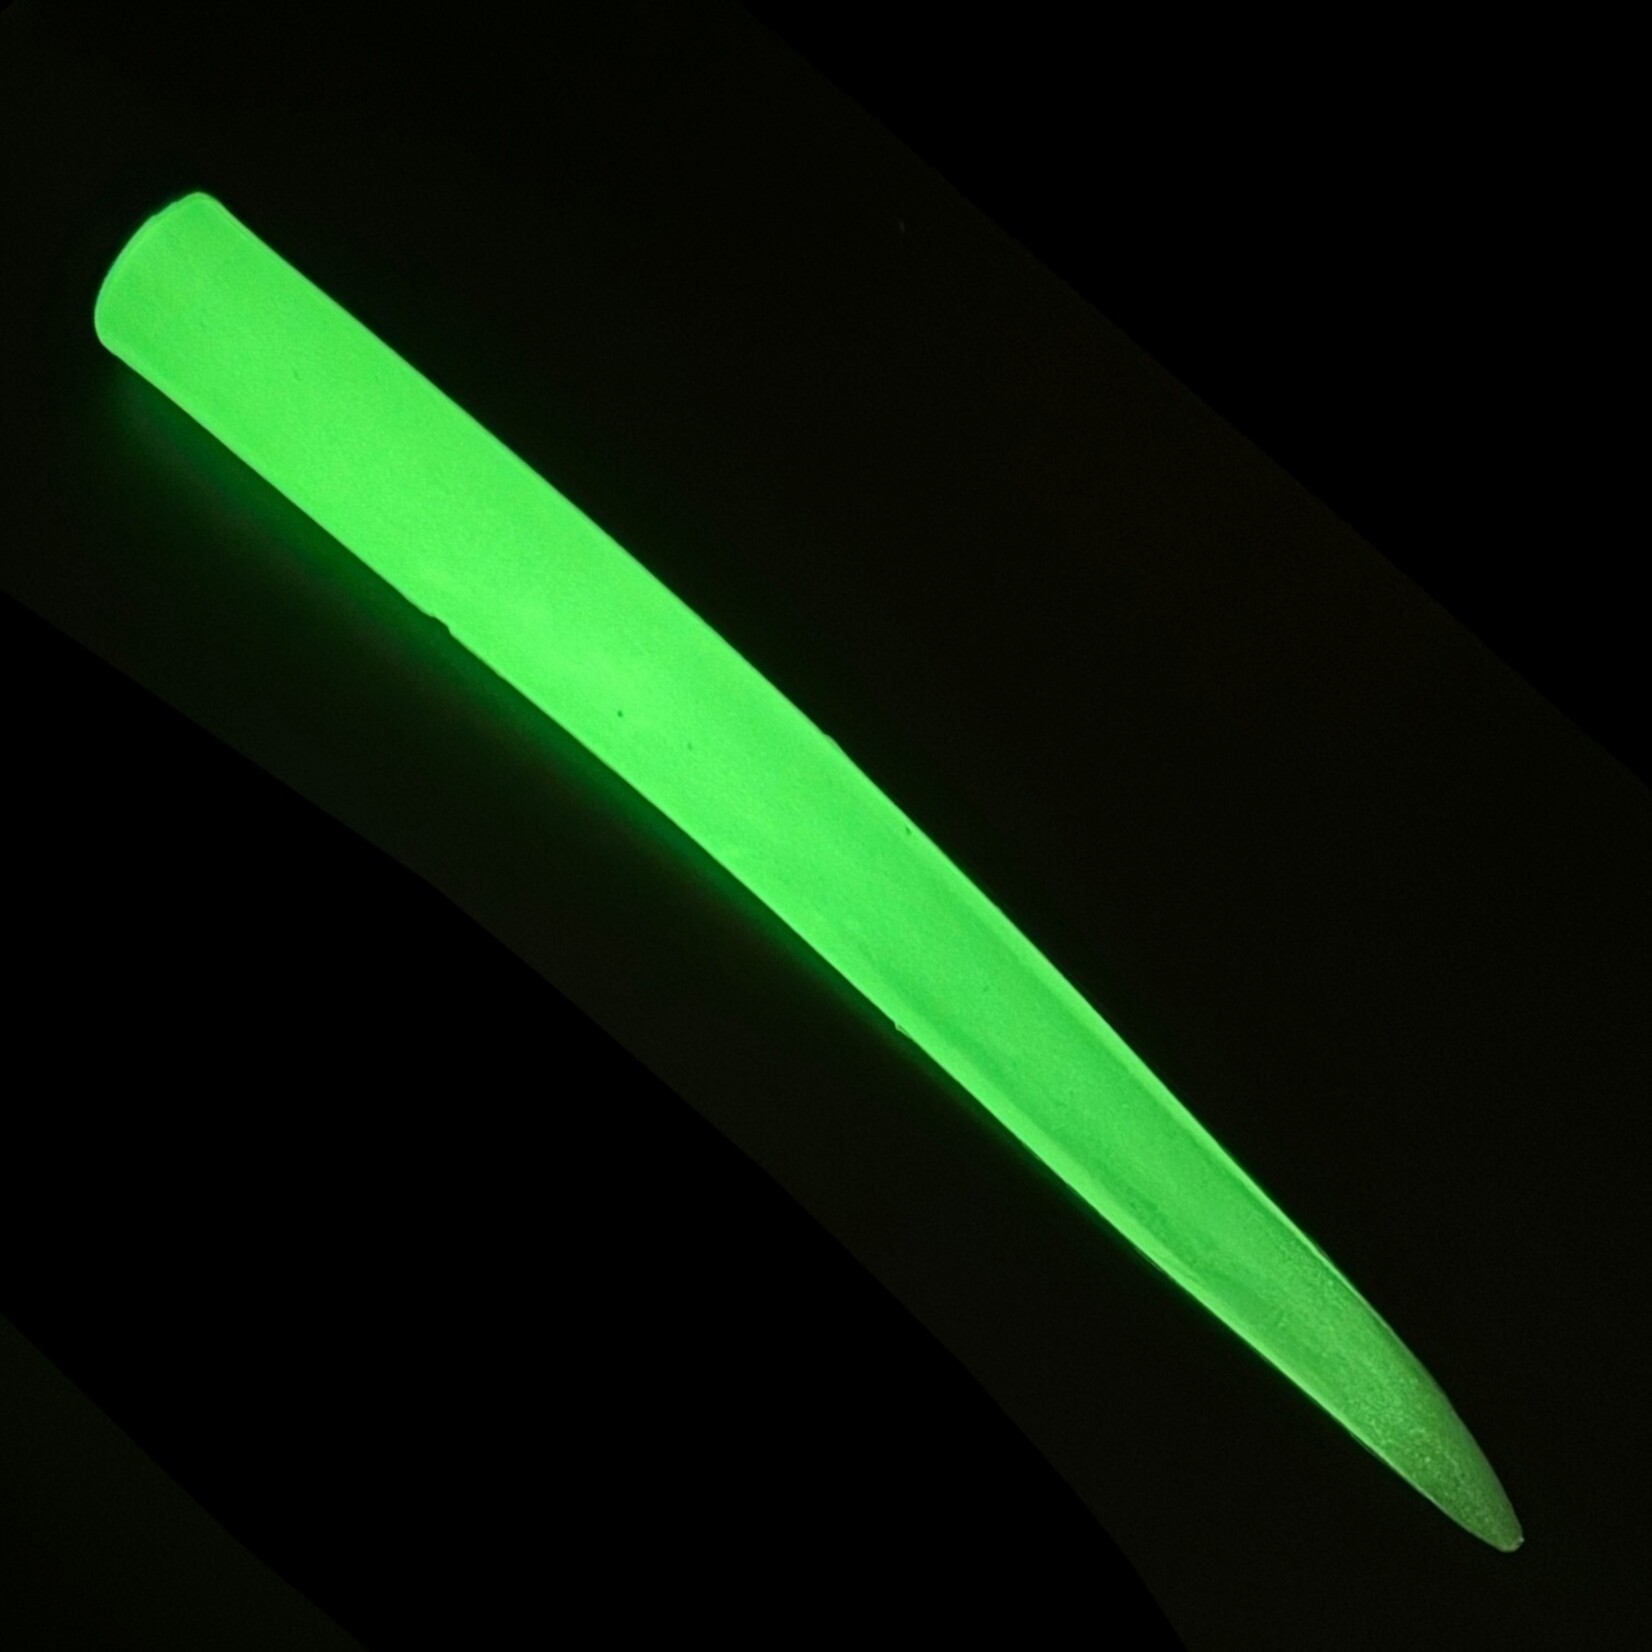 RonZ Ronz GLOW Replacement Tails